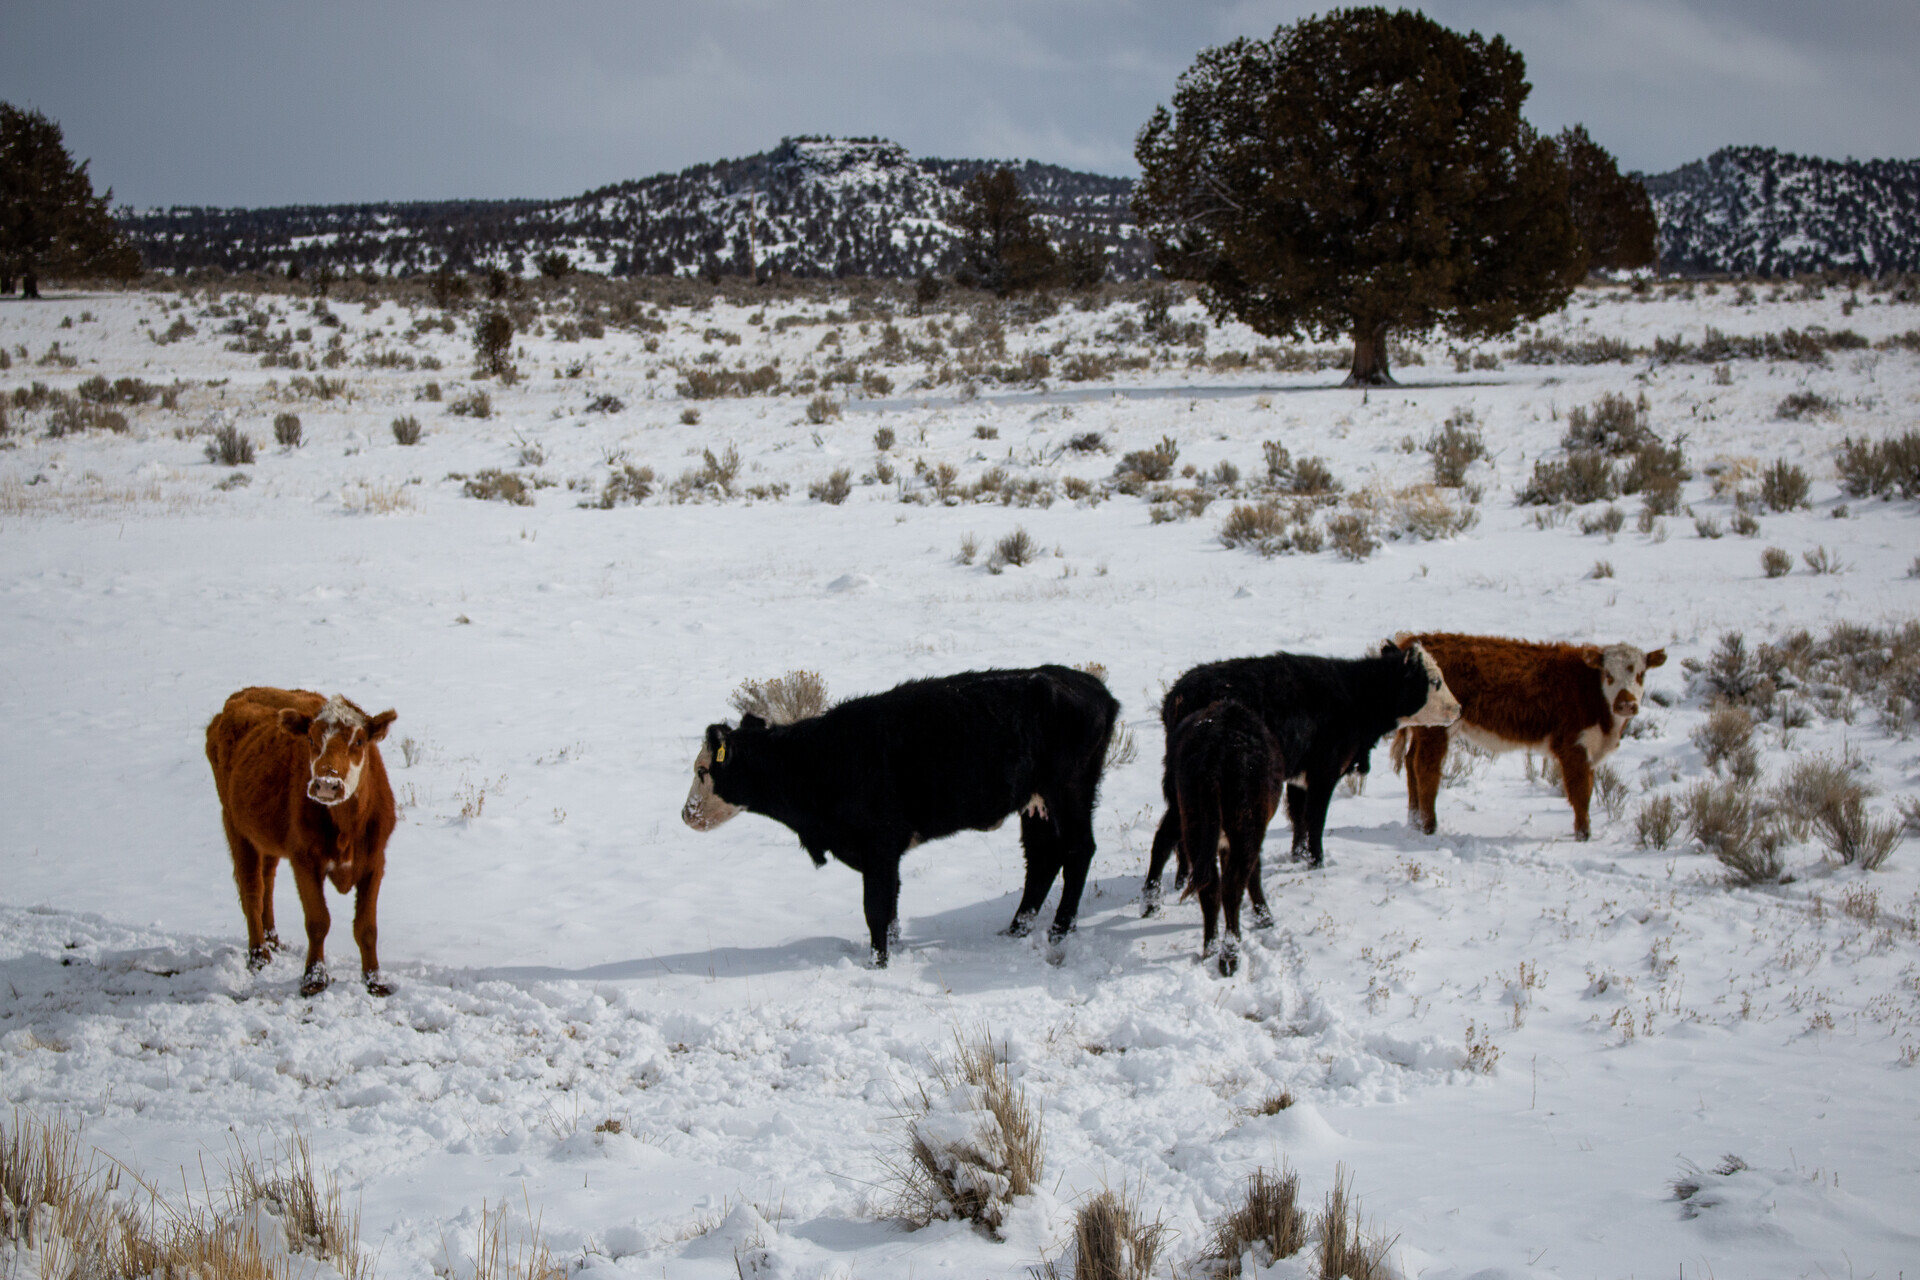 Brown and black cows are pictured on a snow-covered field.